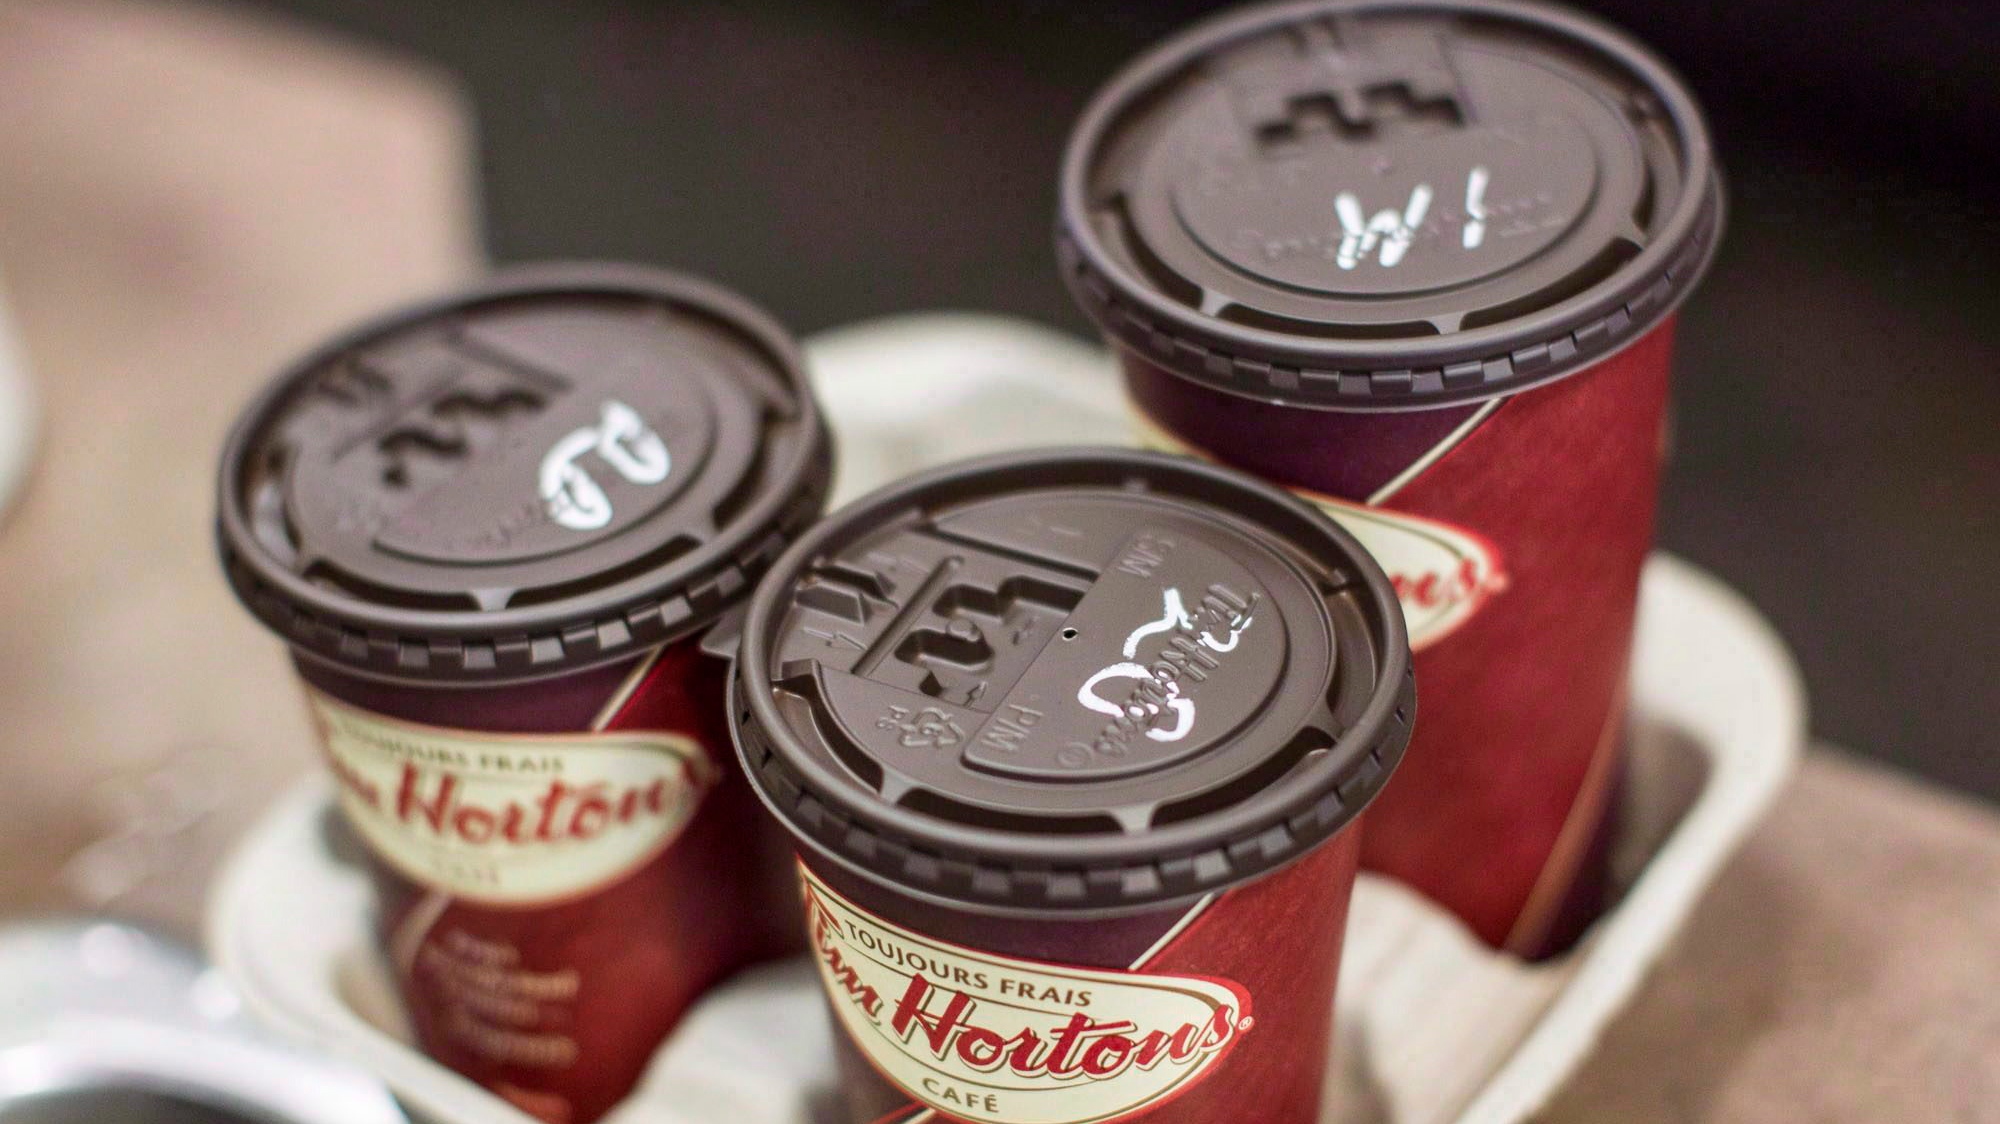 Tim Hortons, franchisees in legal spat over 'shattering' coffee pots